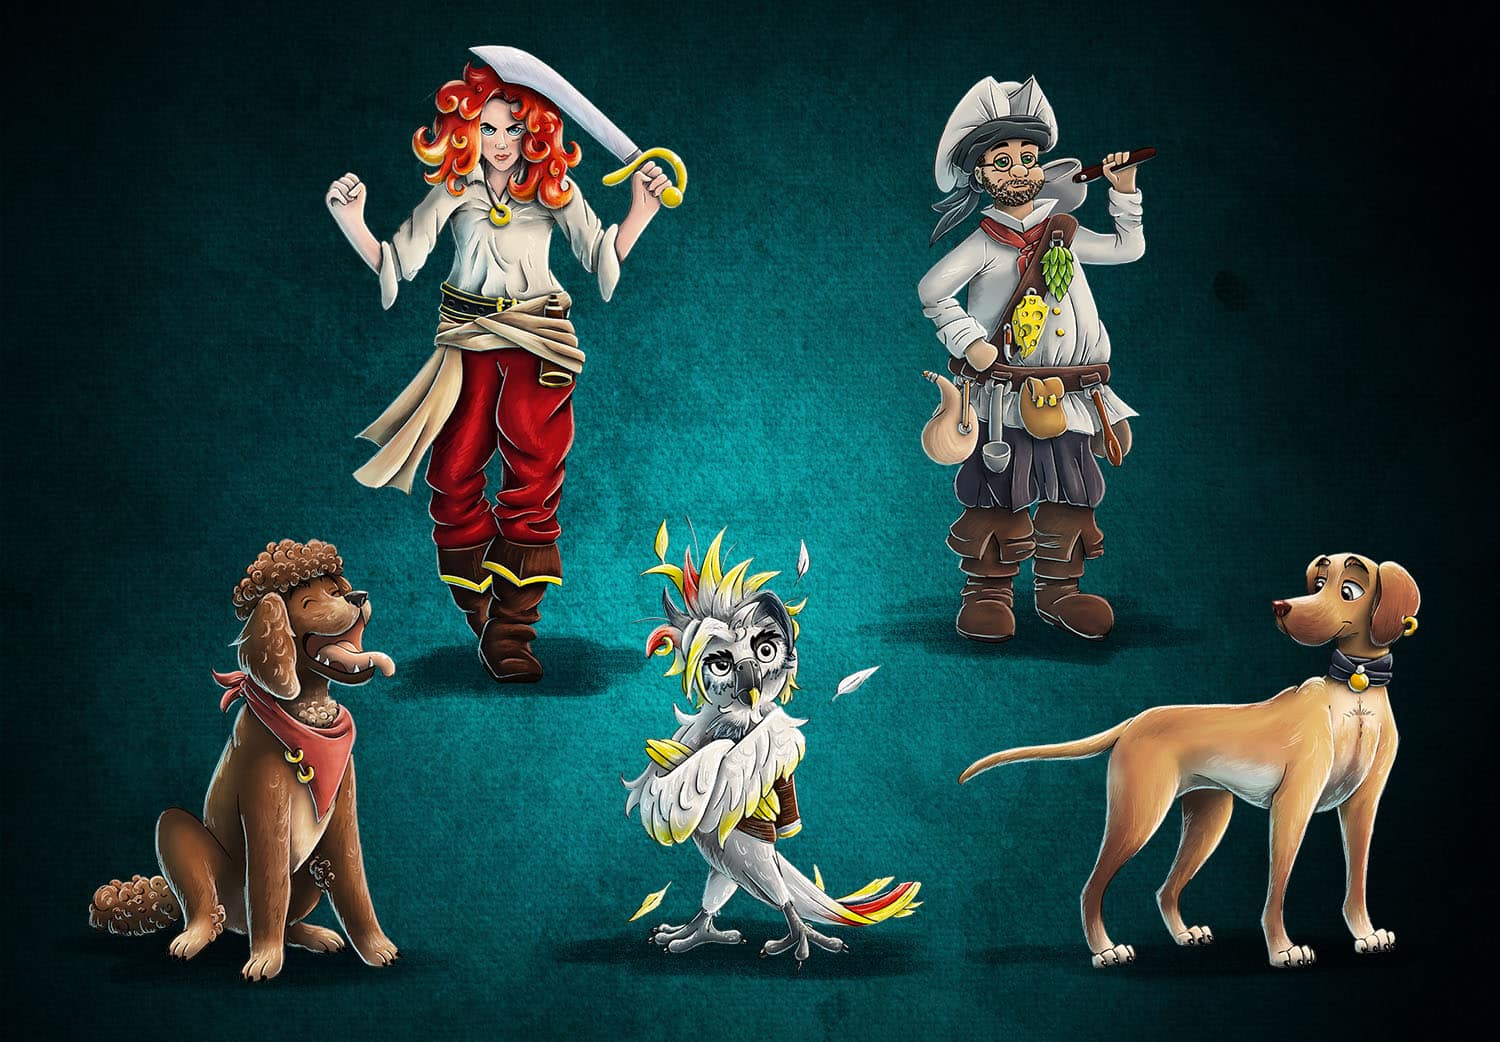 Pirate dogs, children's book illustrator wanted, children's book illustrated, children's book created, children's book illustrator Andrea Baitz, book illustrator wanted, book illustrator, children's book illustration, book illustration, looking for children's book illustrator, looking for illustrator, Character design